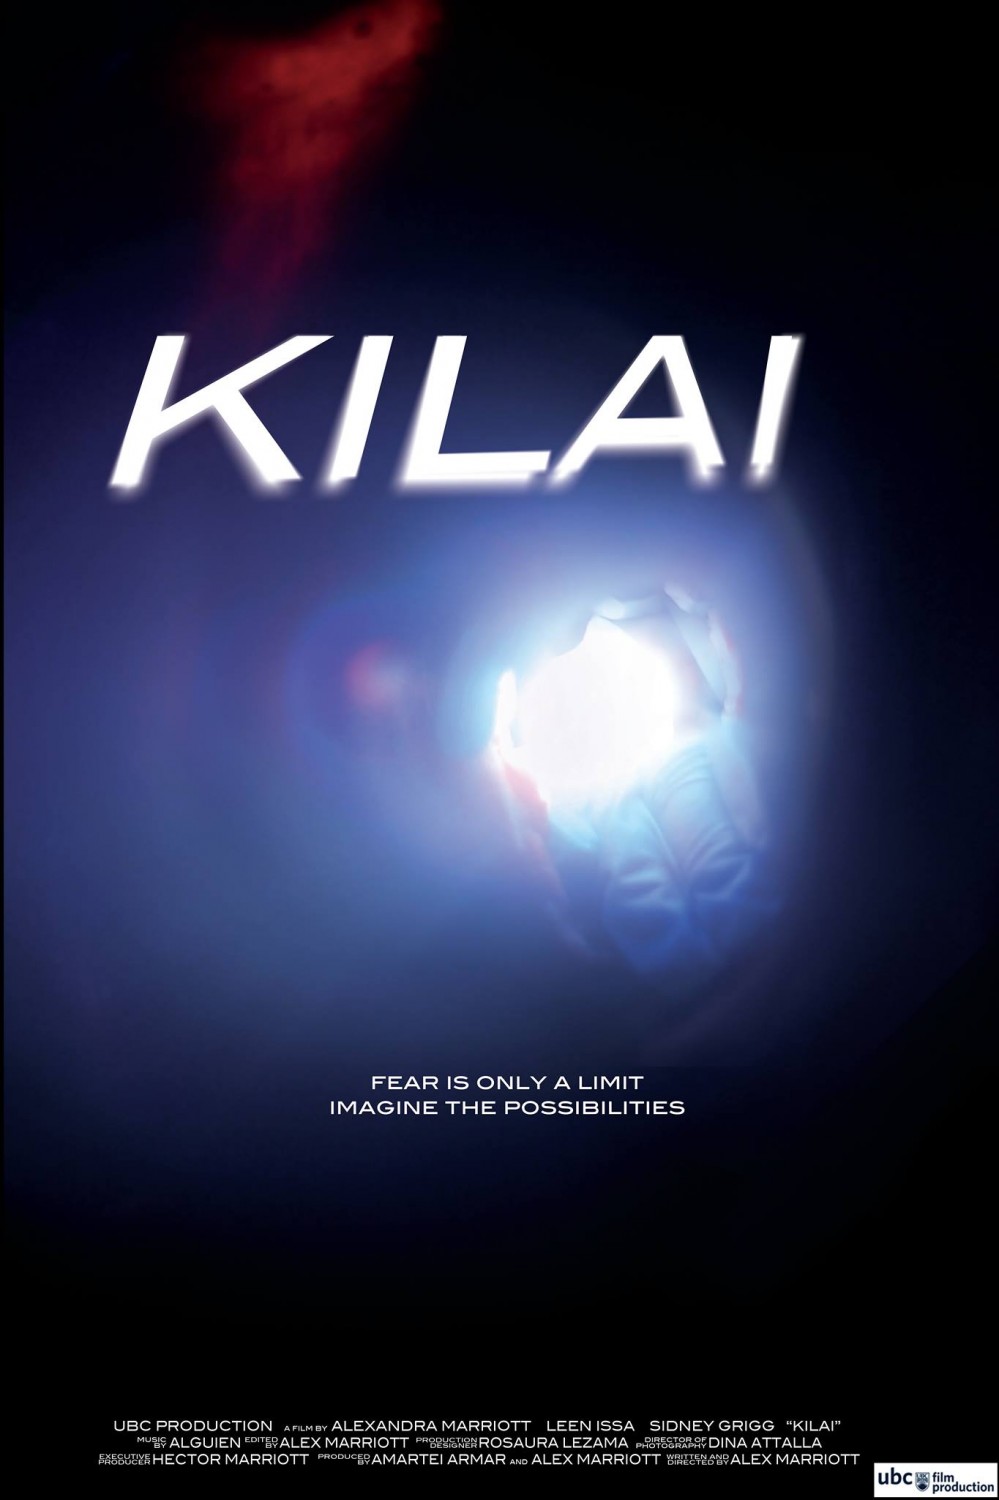 Extra Large Movie Poster Image for Kilai